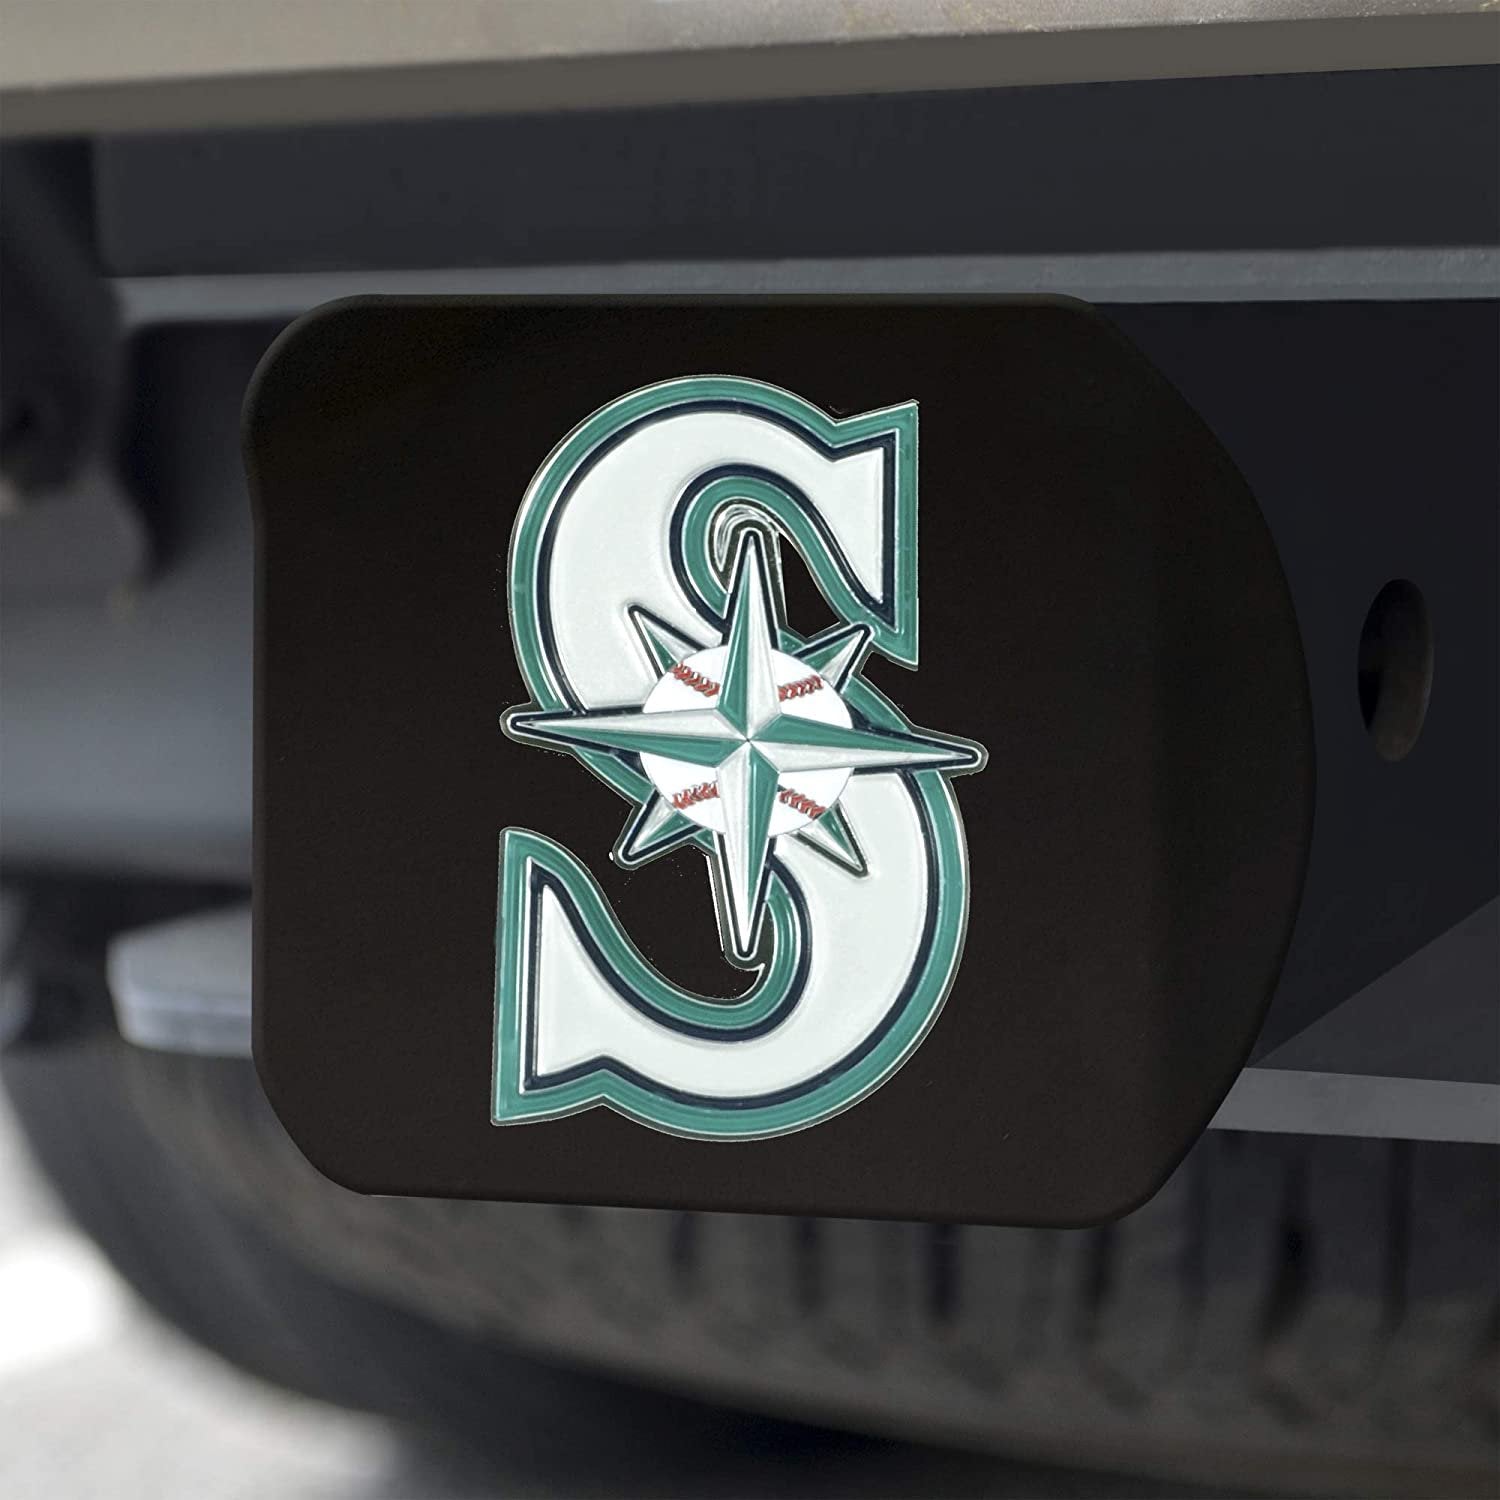 Seattle Mariners Hitch Cover Black Solid Metal with Raised Color Metal Emblem 2" Square Type III